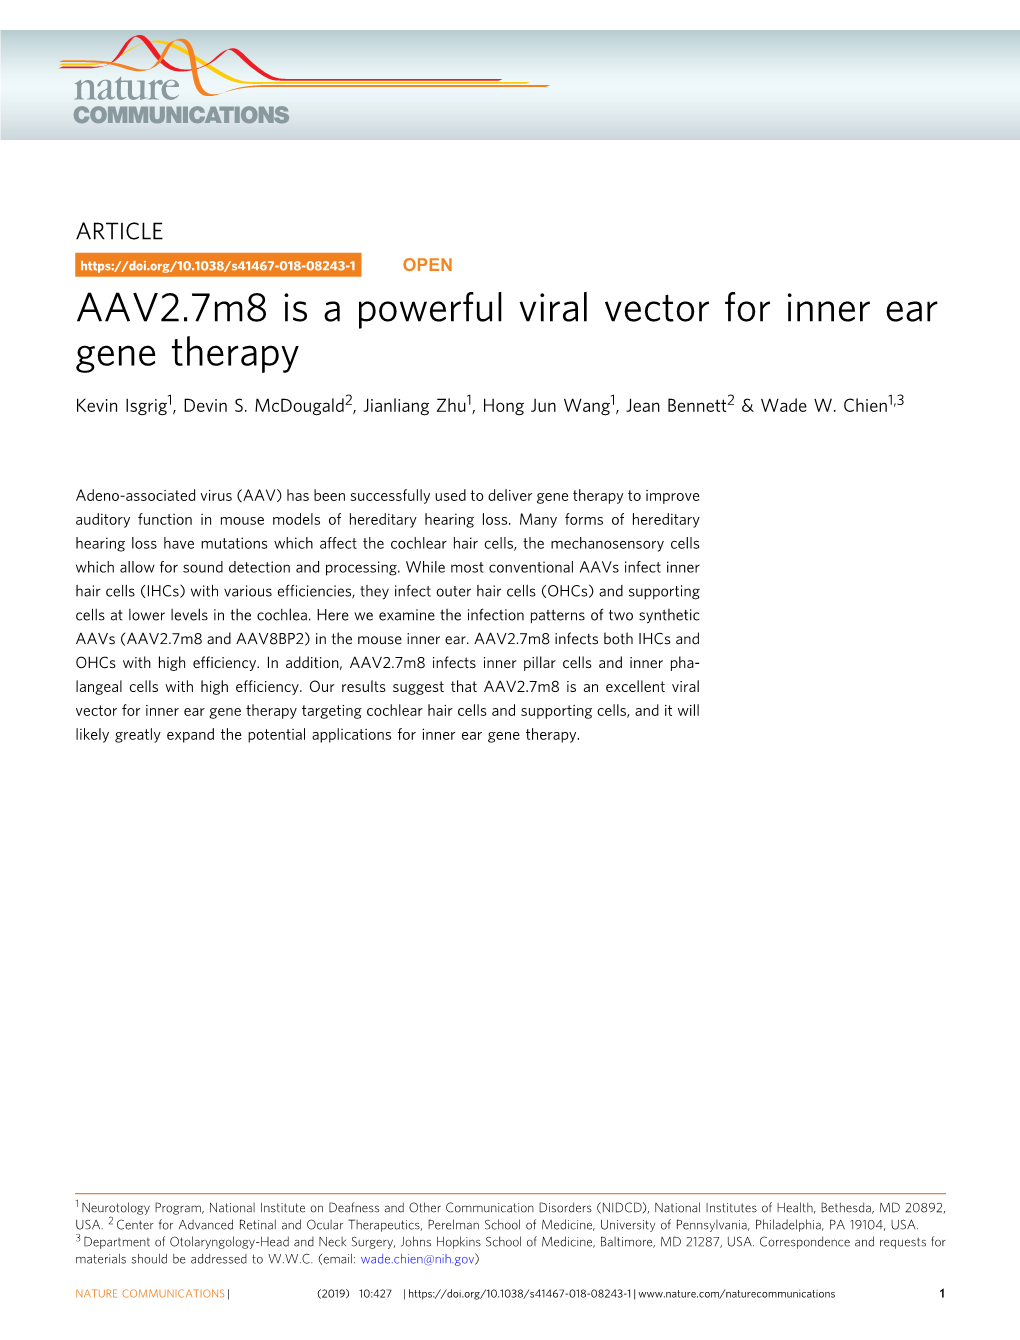 AAV2.7M8 Is a Powerful Viral Vector for Inner Ear Gene Therapy